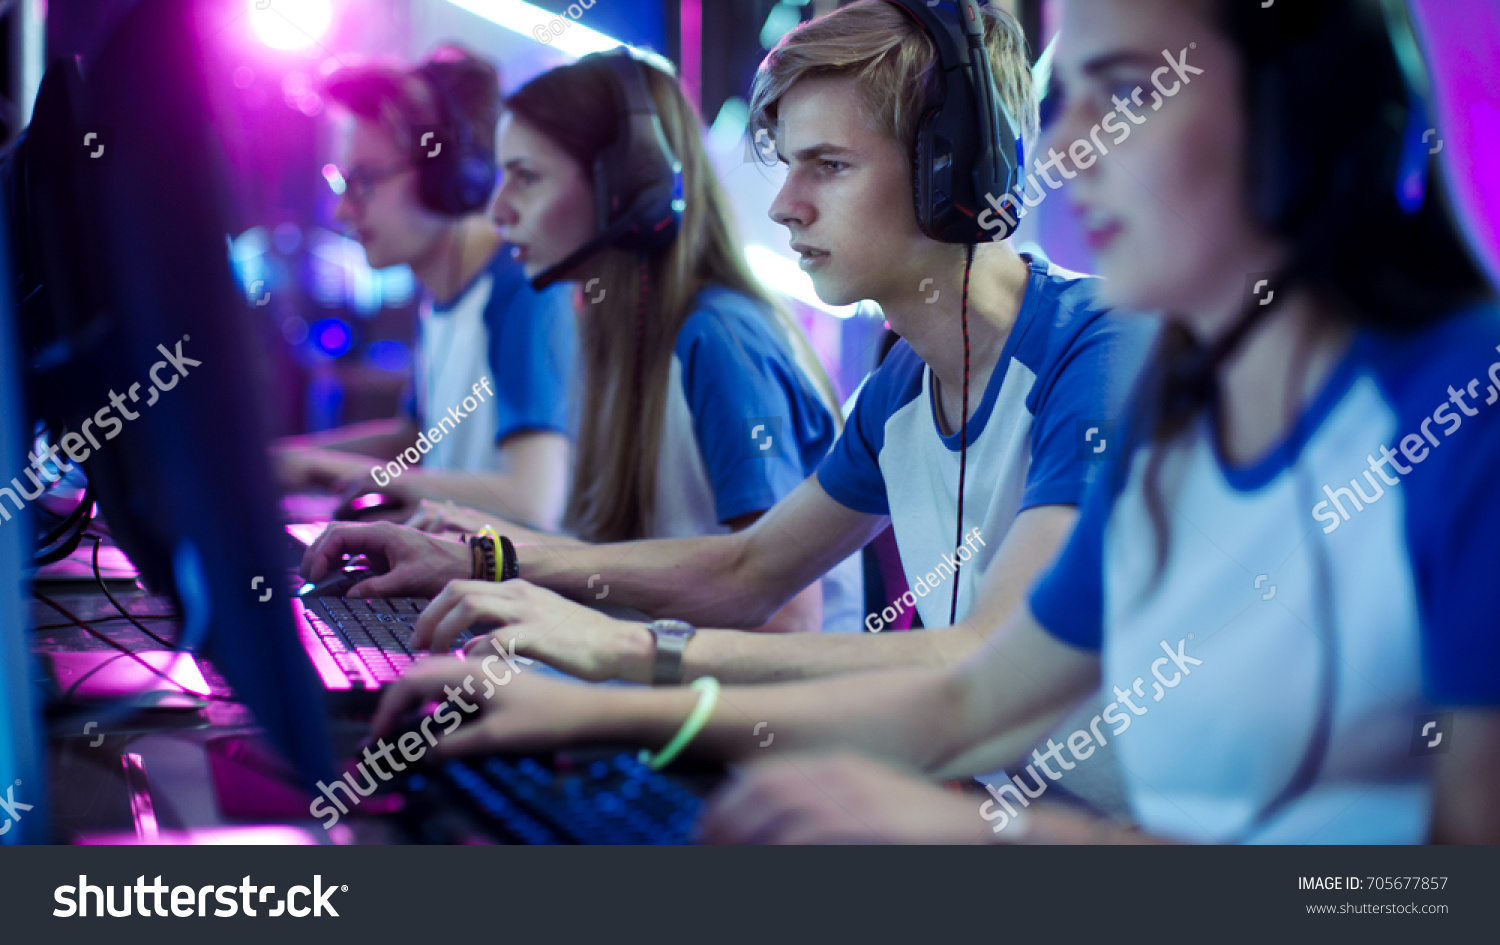 Team of Professional eSport Gamers Playing in Competitive Video Games on a Cyber Games Tournament. They using Microphones. #705677857